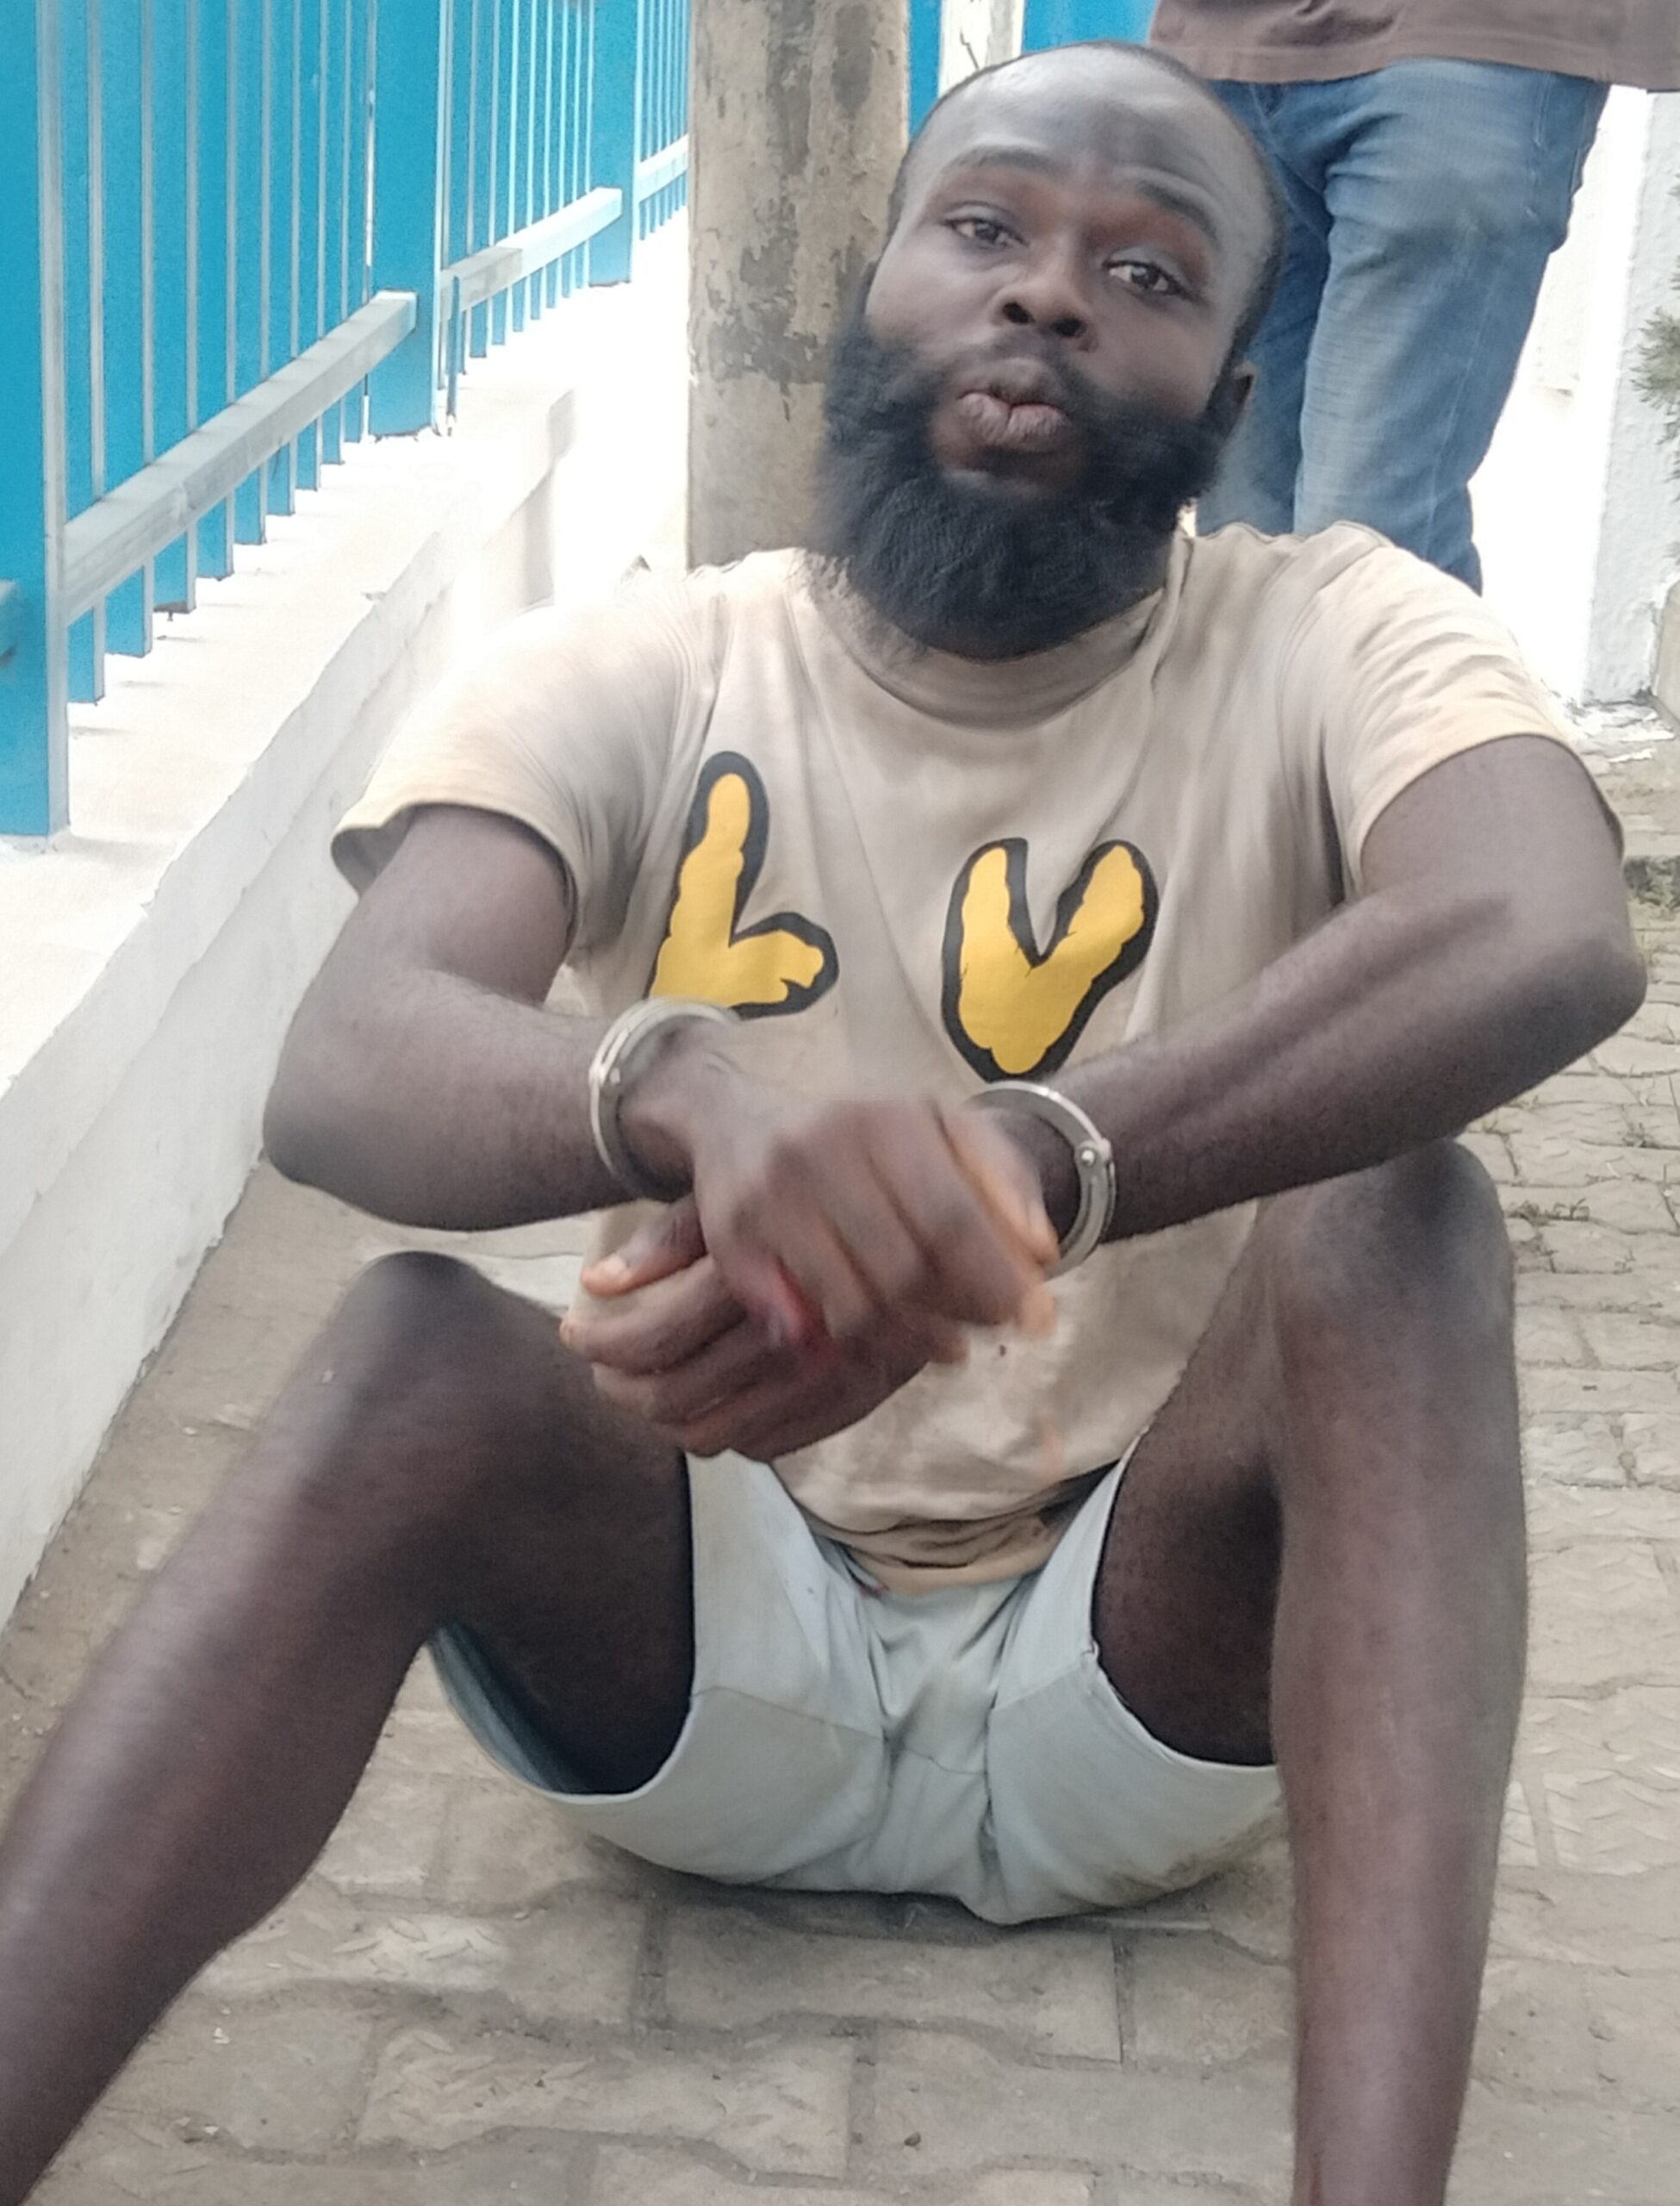 Pandemonium As Mad Man Invades Ecobank, Snatches Customer’s N300, 000, Threatens To Beat Manager In Imo